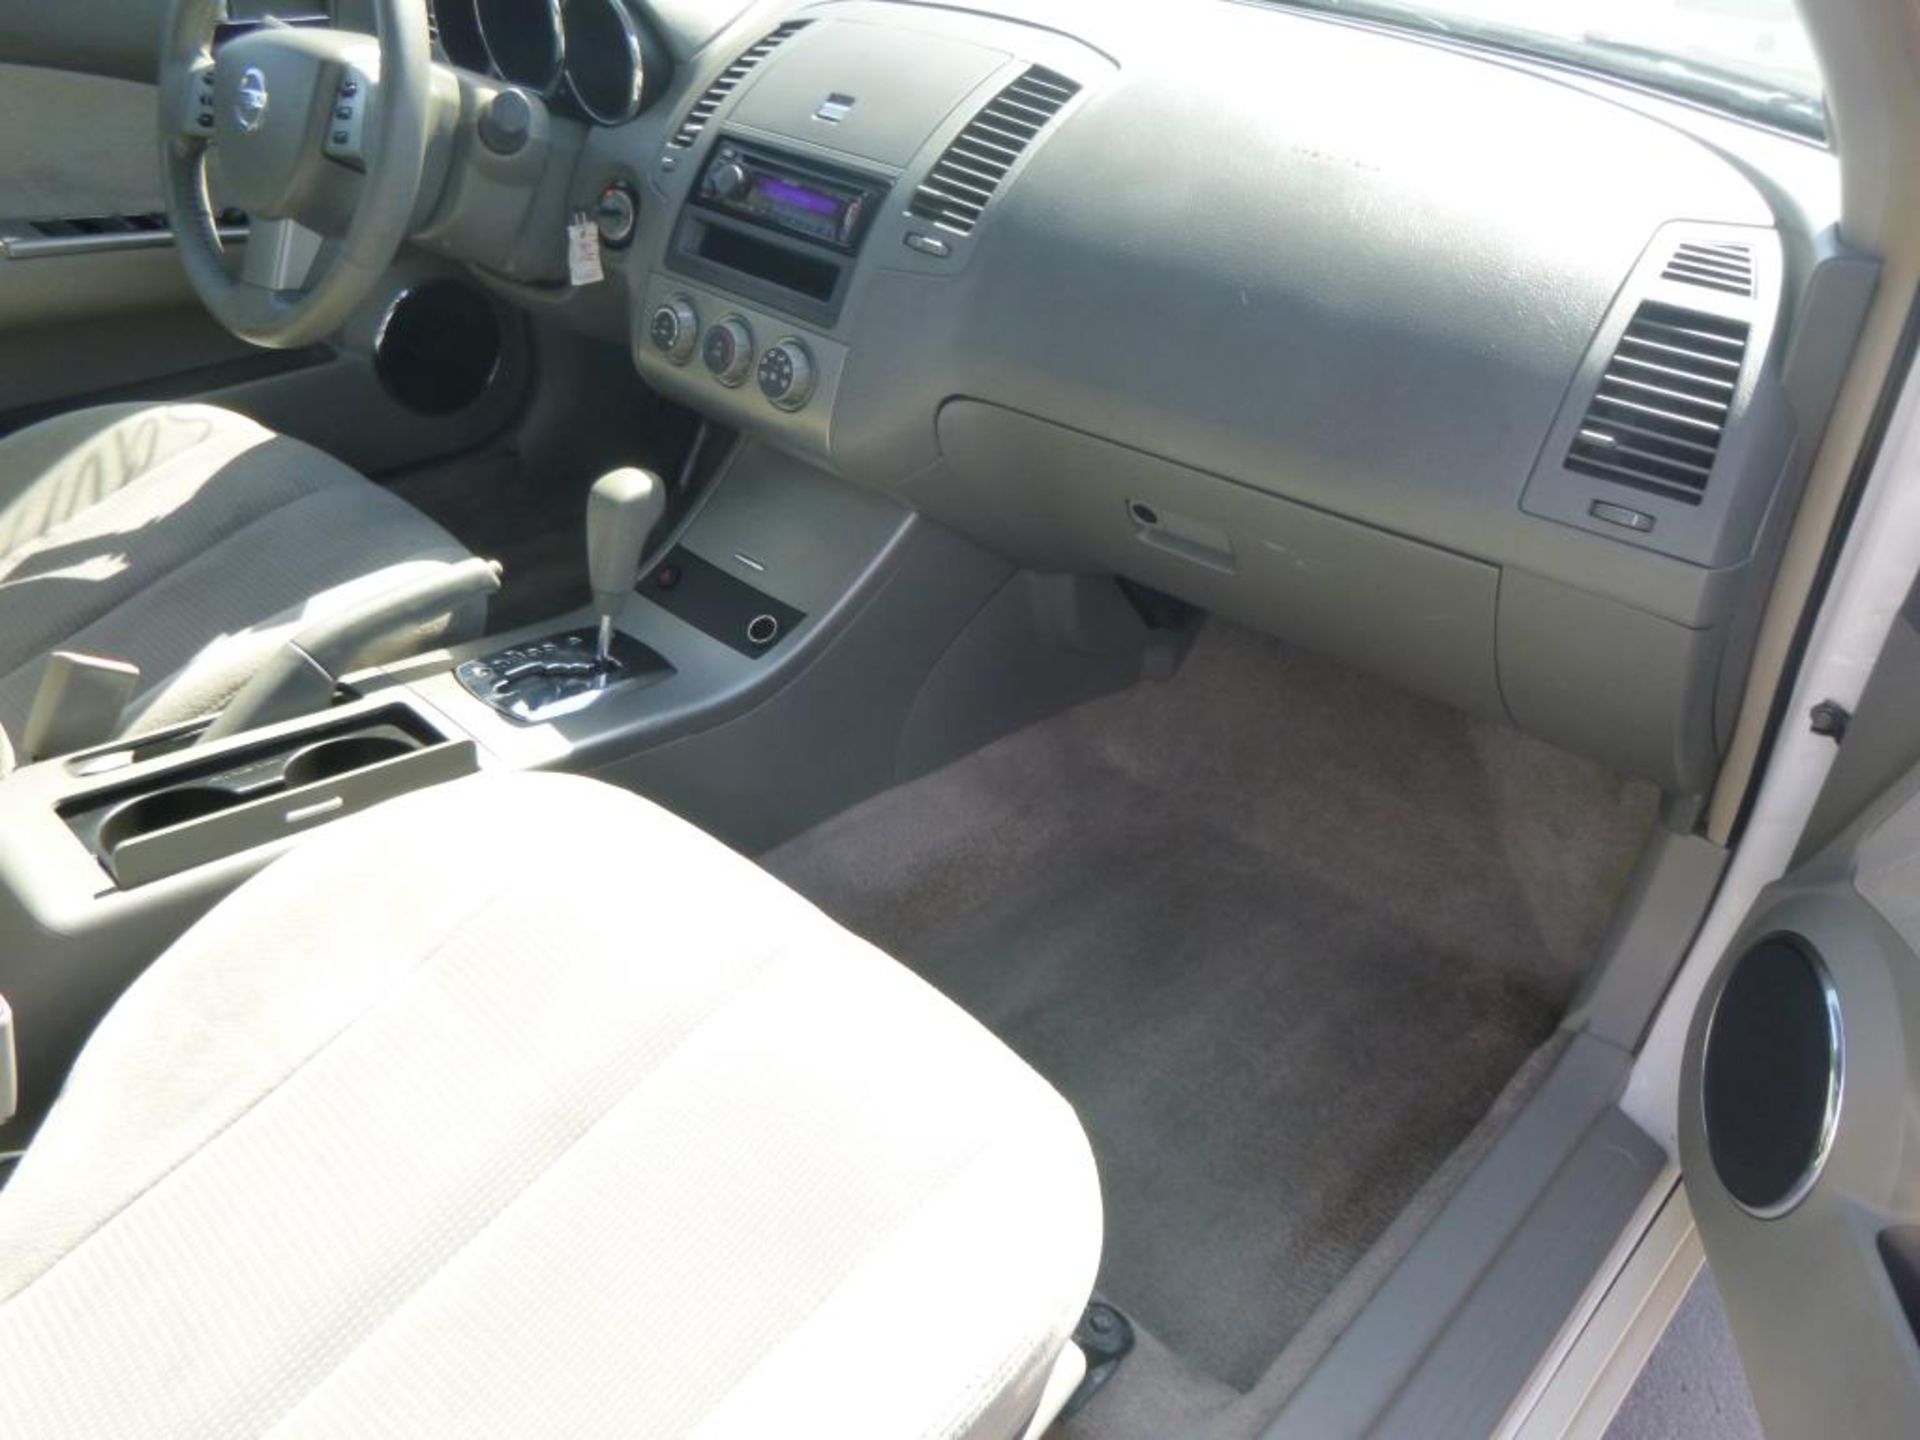 (Lot # 3354) 2005 Nissan Altima - Image 5 of 10